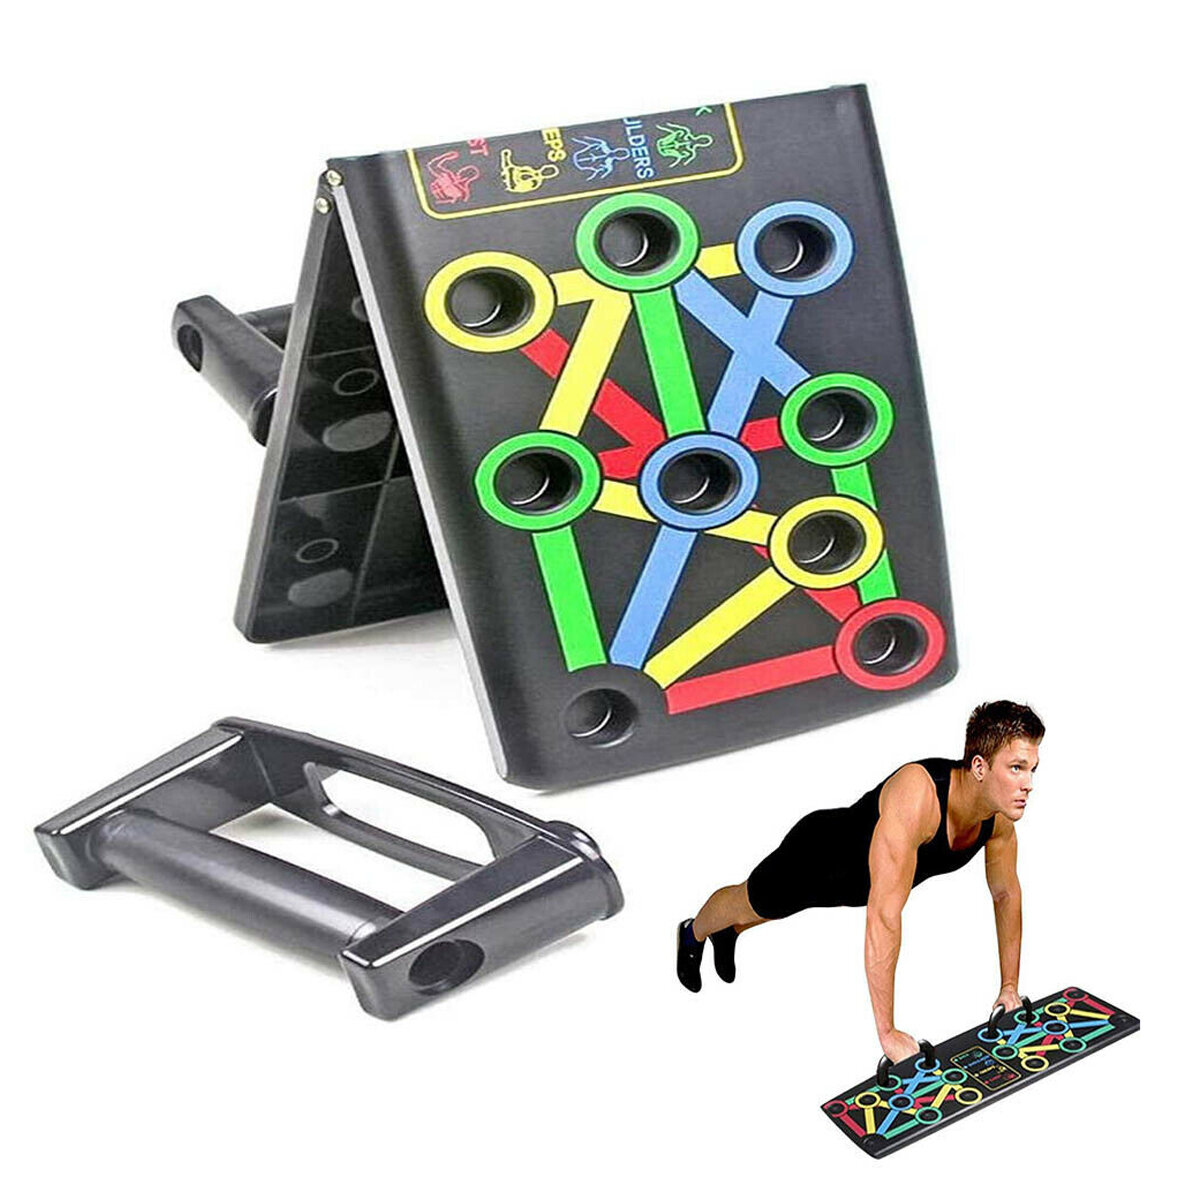 Push Up Rack Board Fitness Workout Train Gym Muscle Exercise Stands 9 in 1 UK